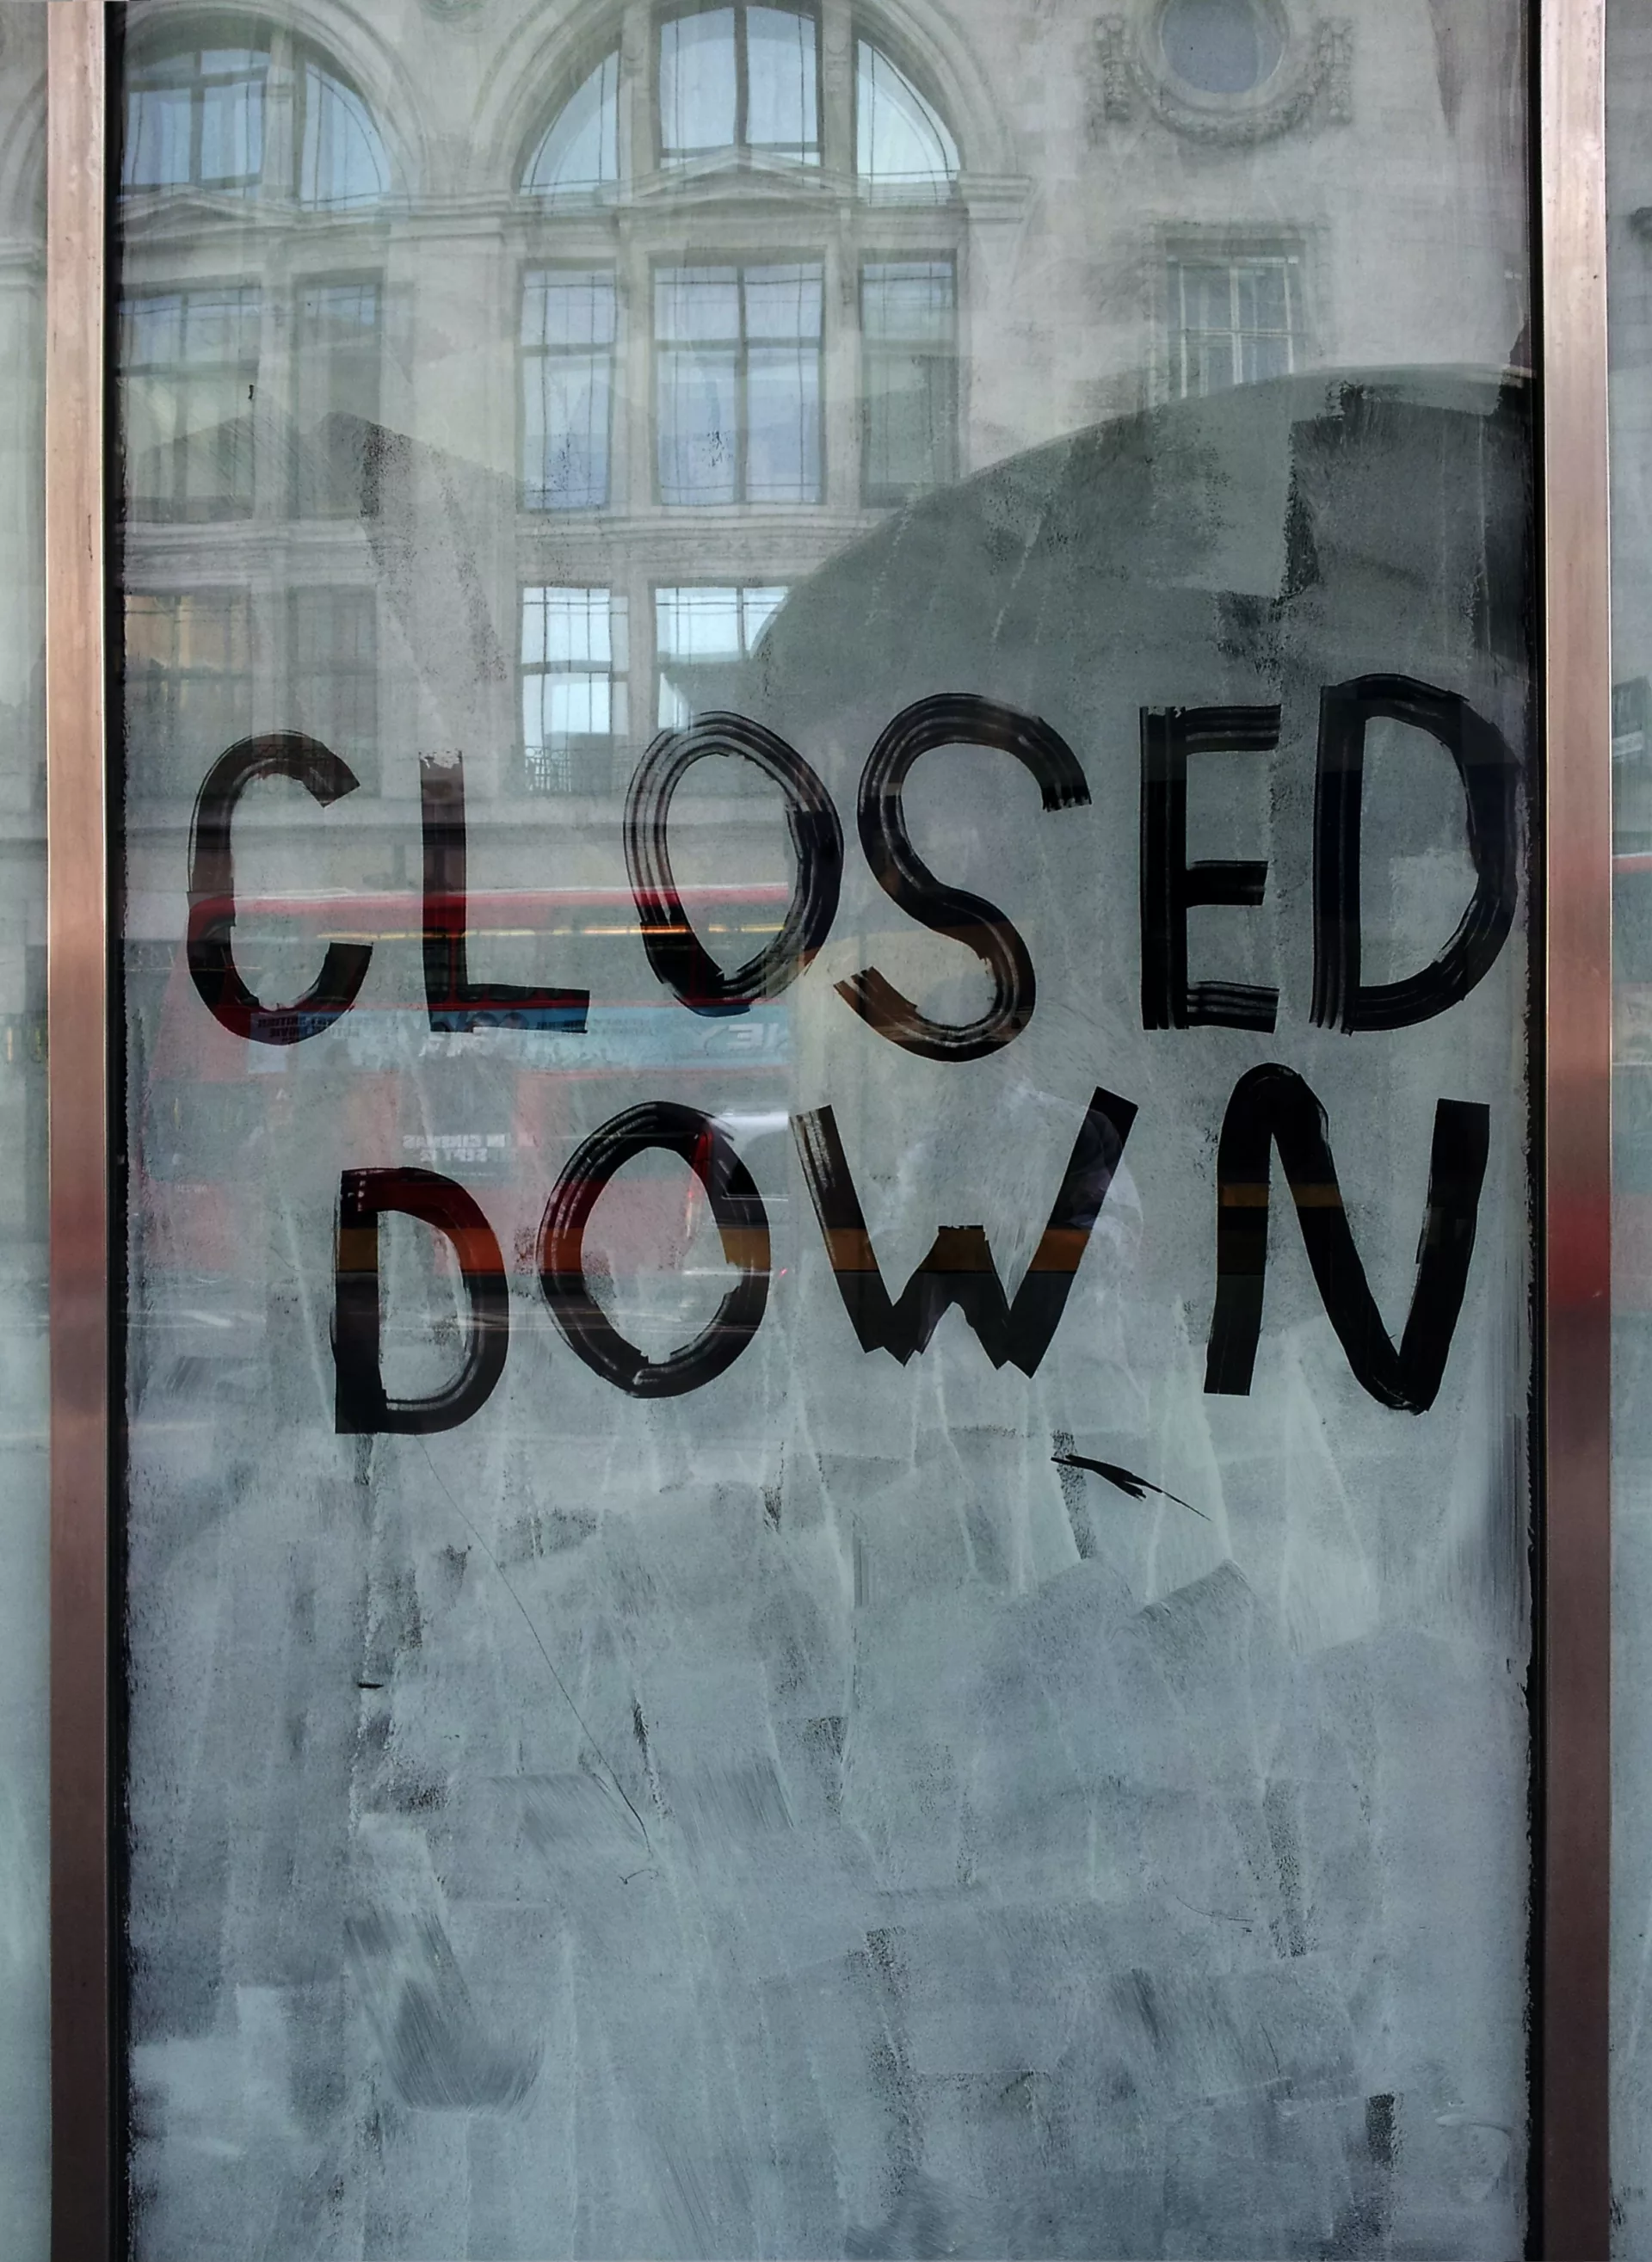 Window with the writing "closed down"